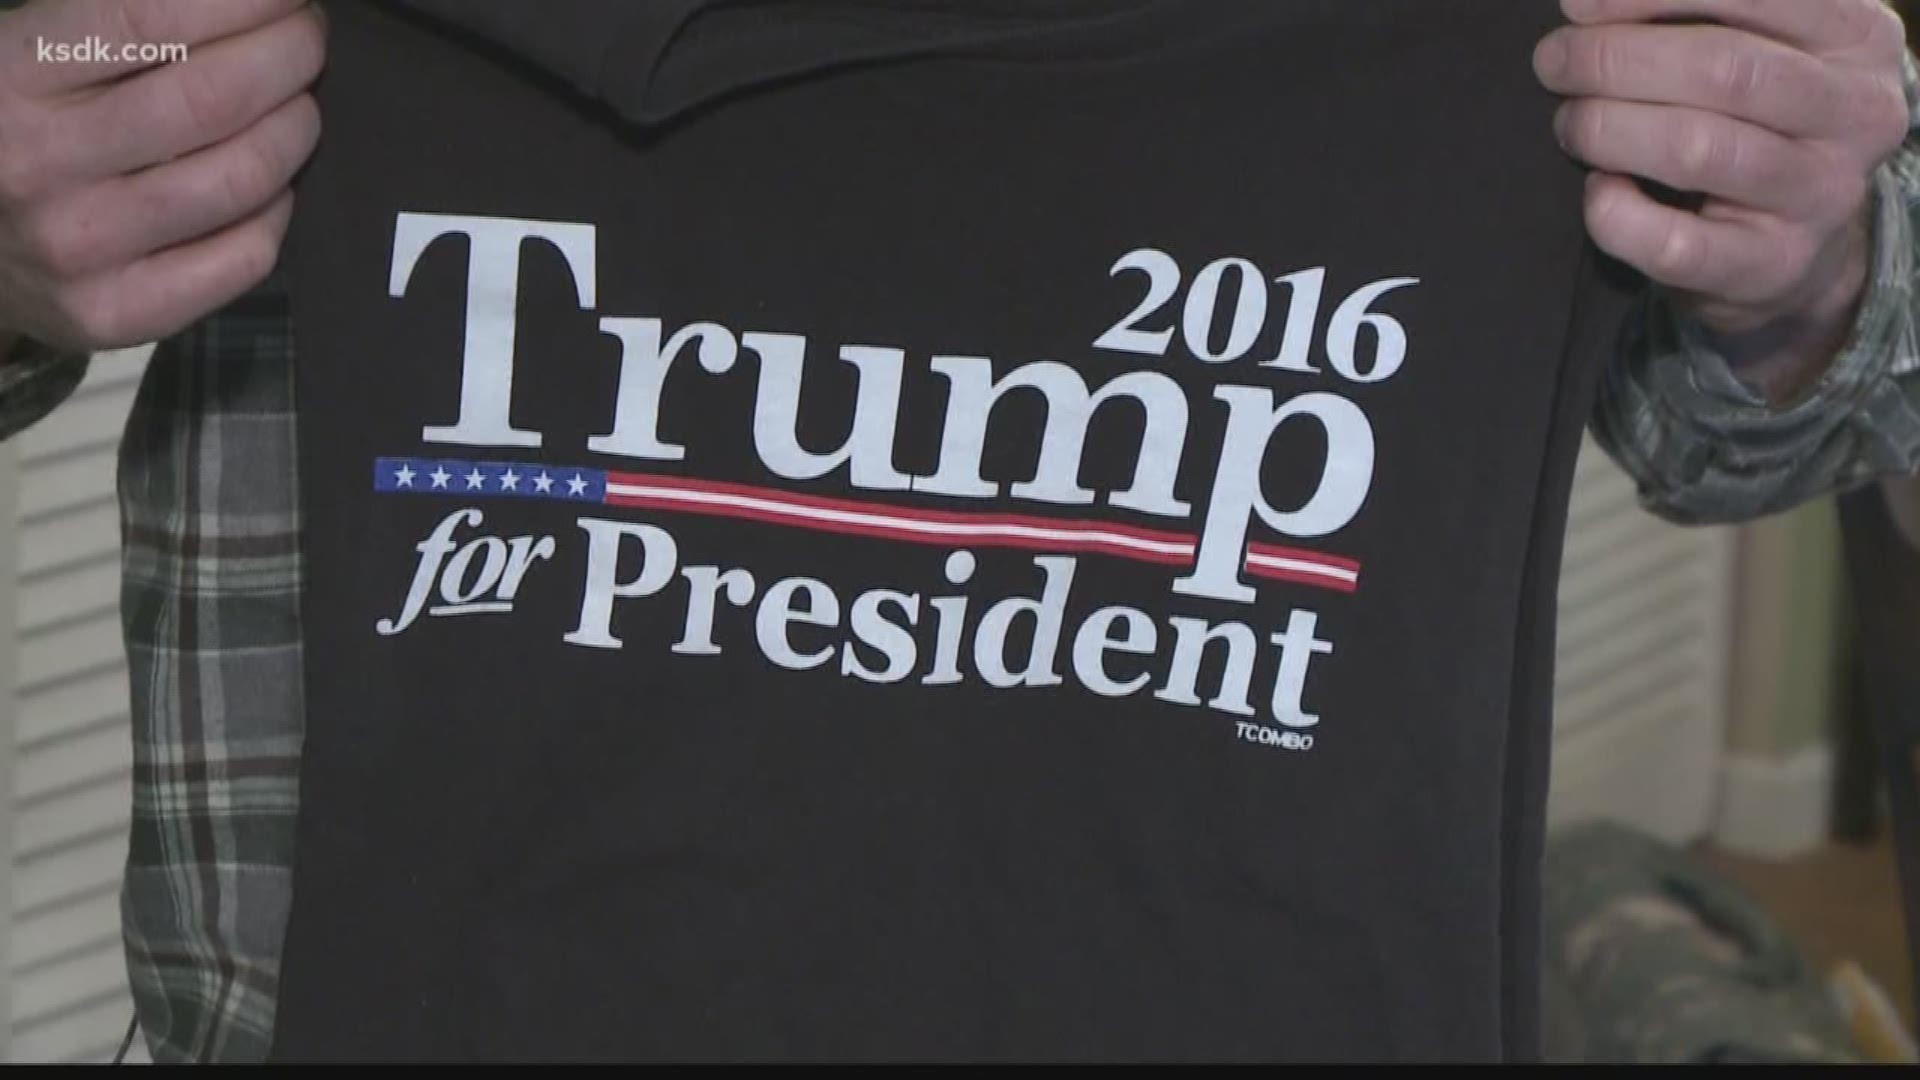 The owner of a gym asked a man wearing a Trump shirt to never wear the shirt again. Was she within her rights?